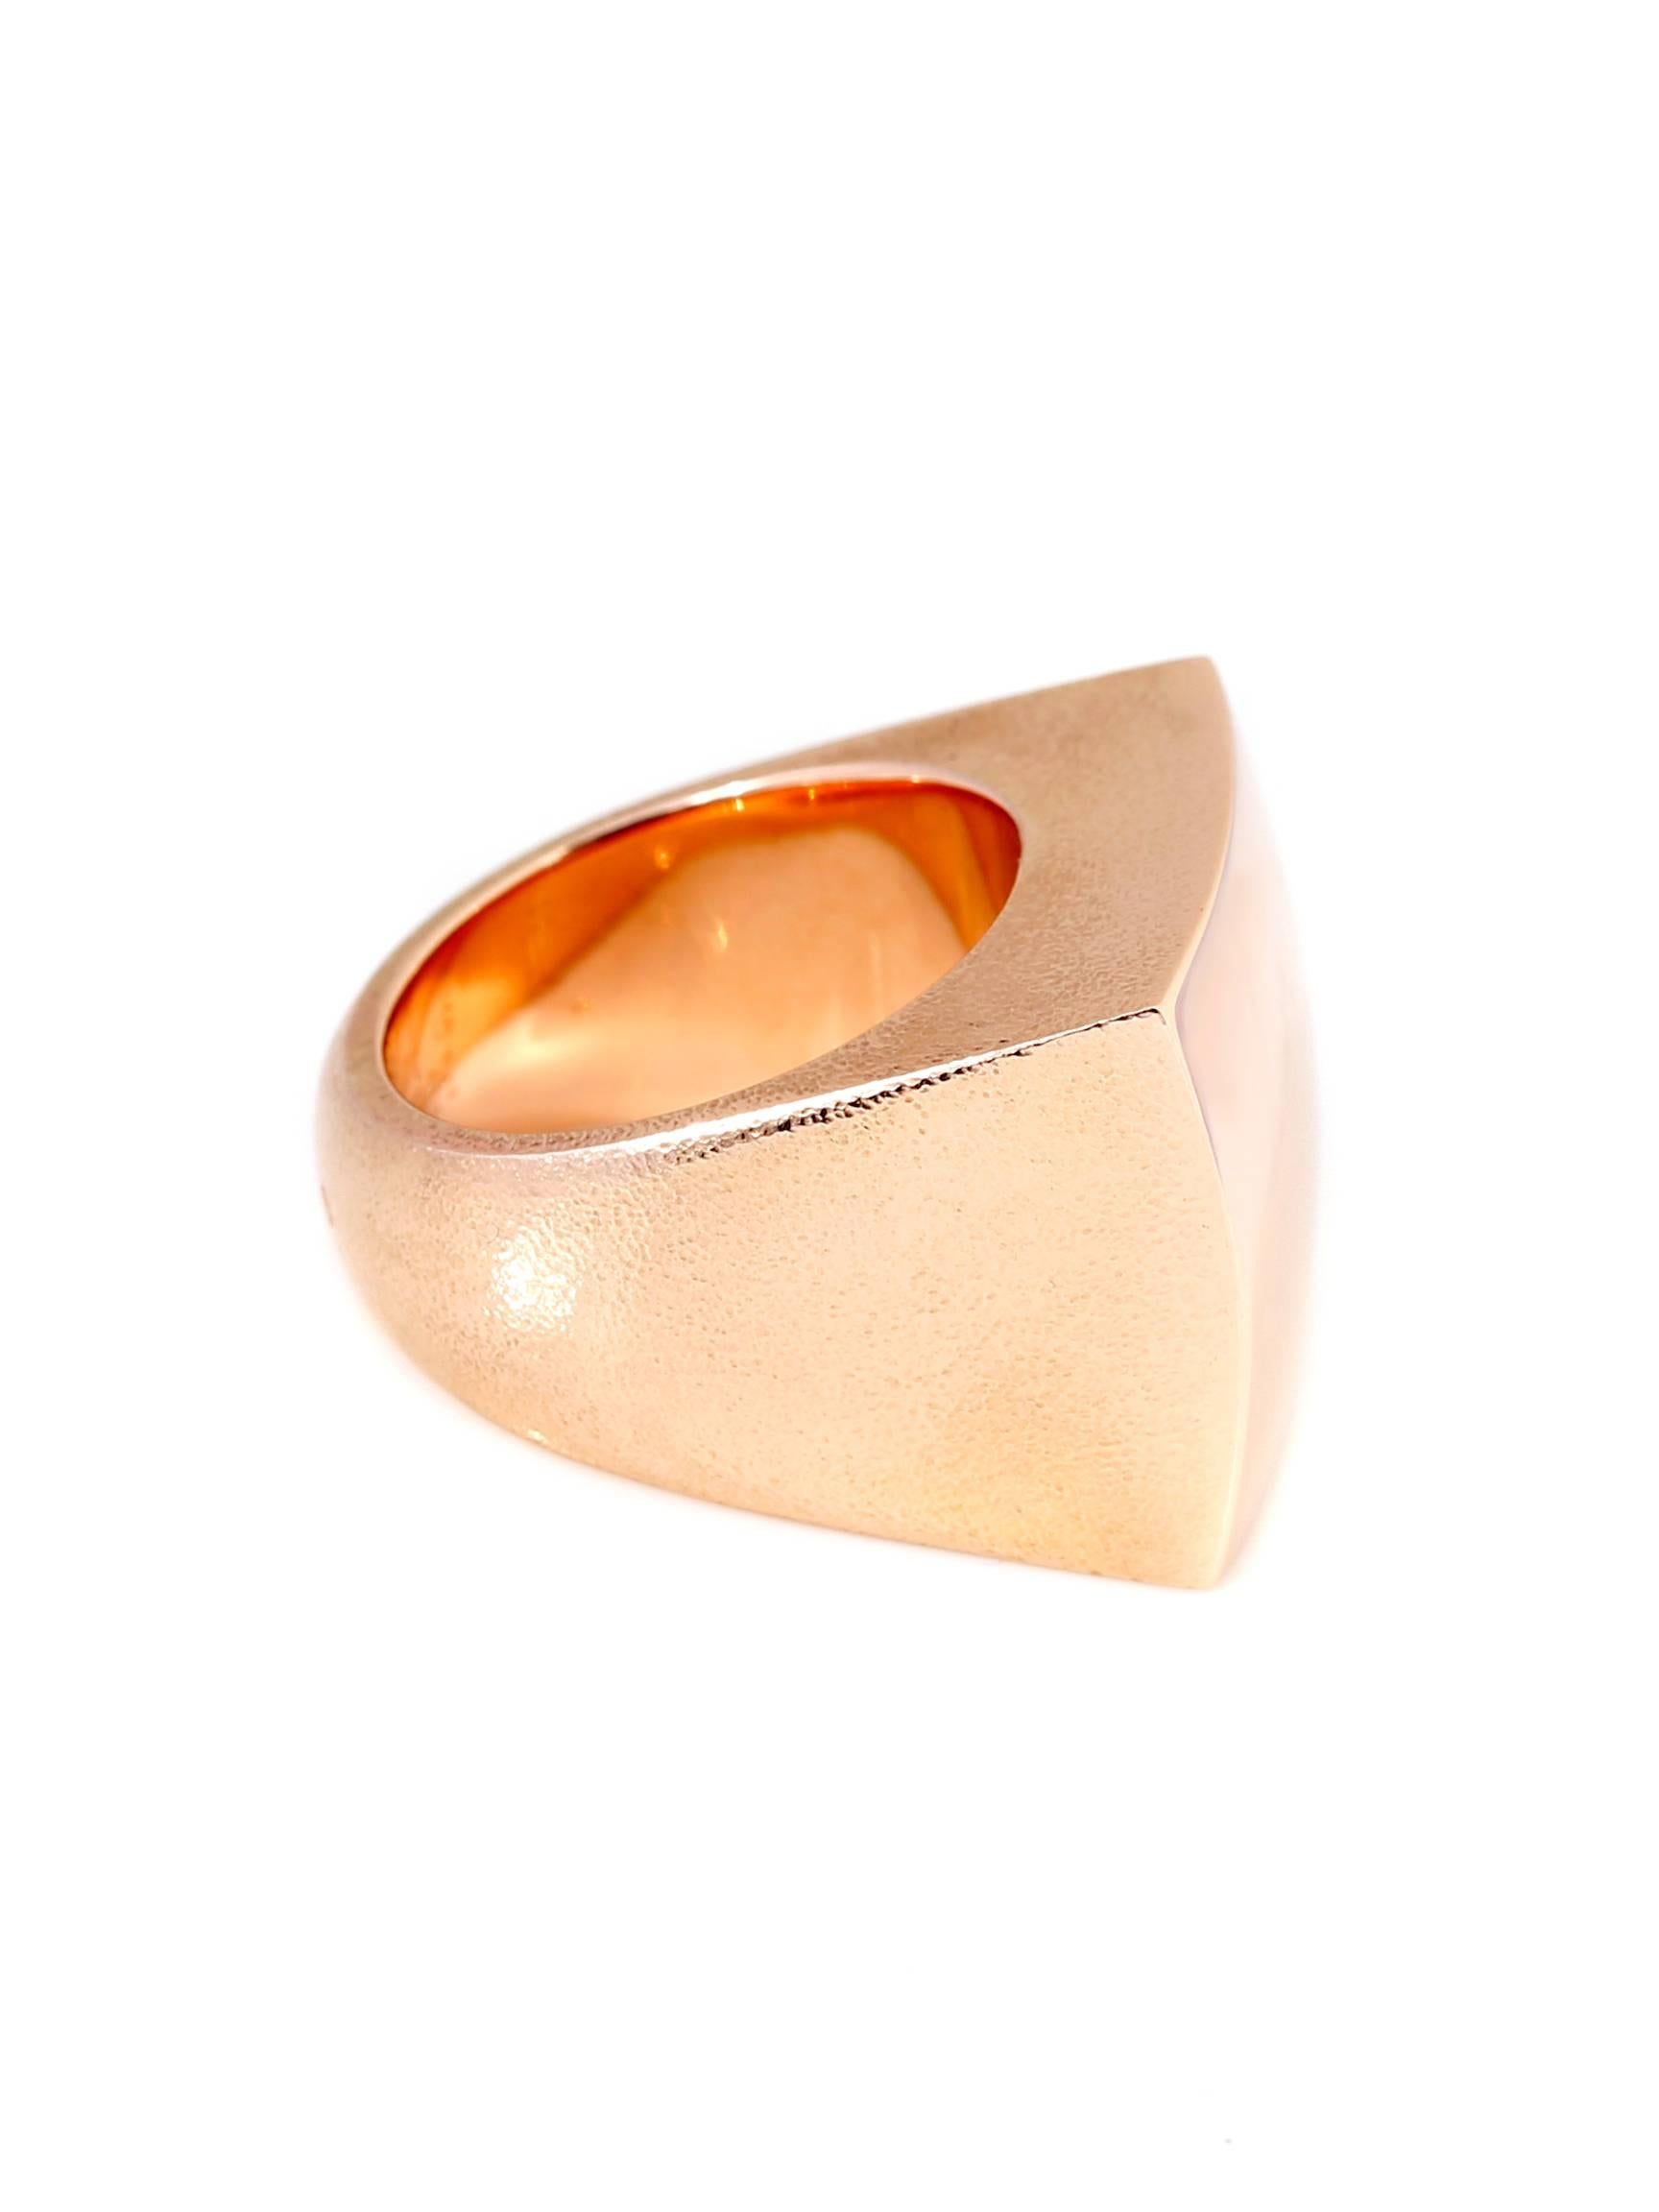 Hermes high polished top surface followed by textured sides rose gold 18k ring. The ring measures .70